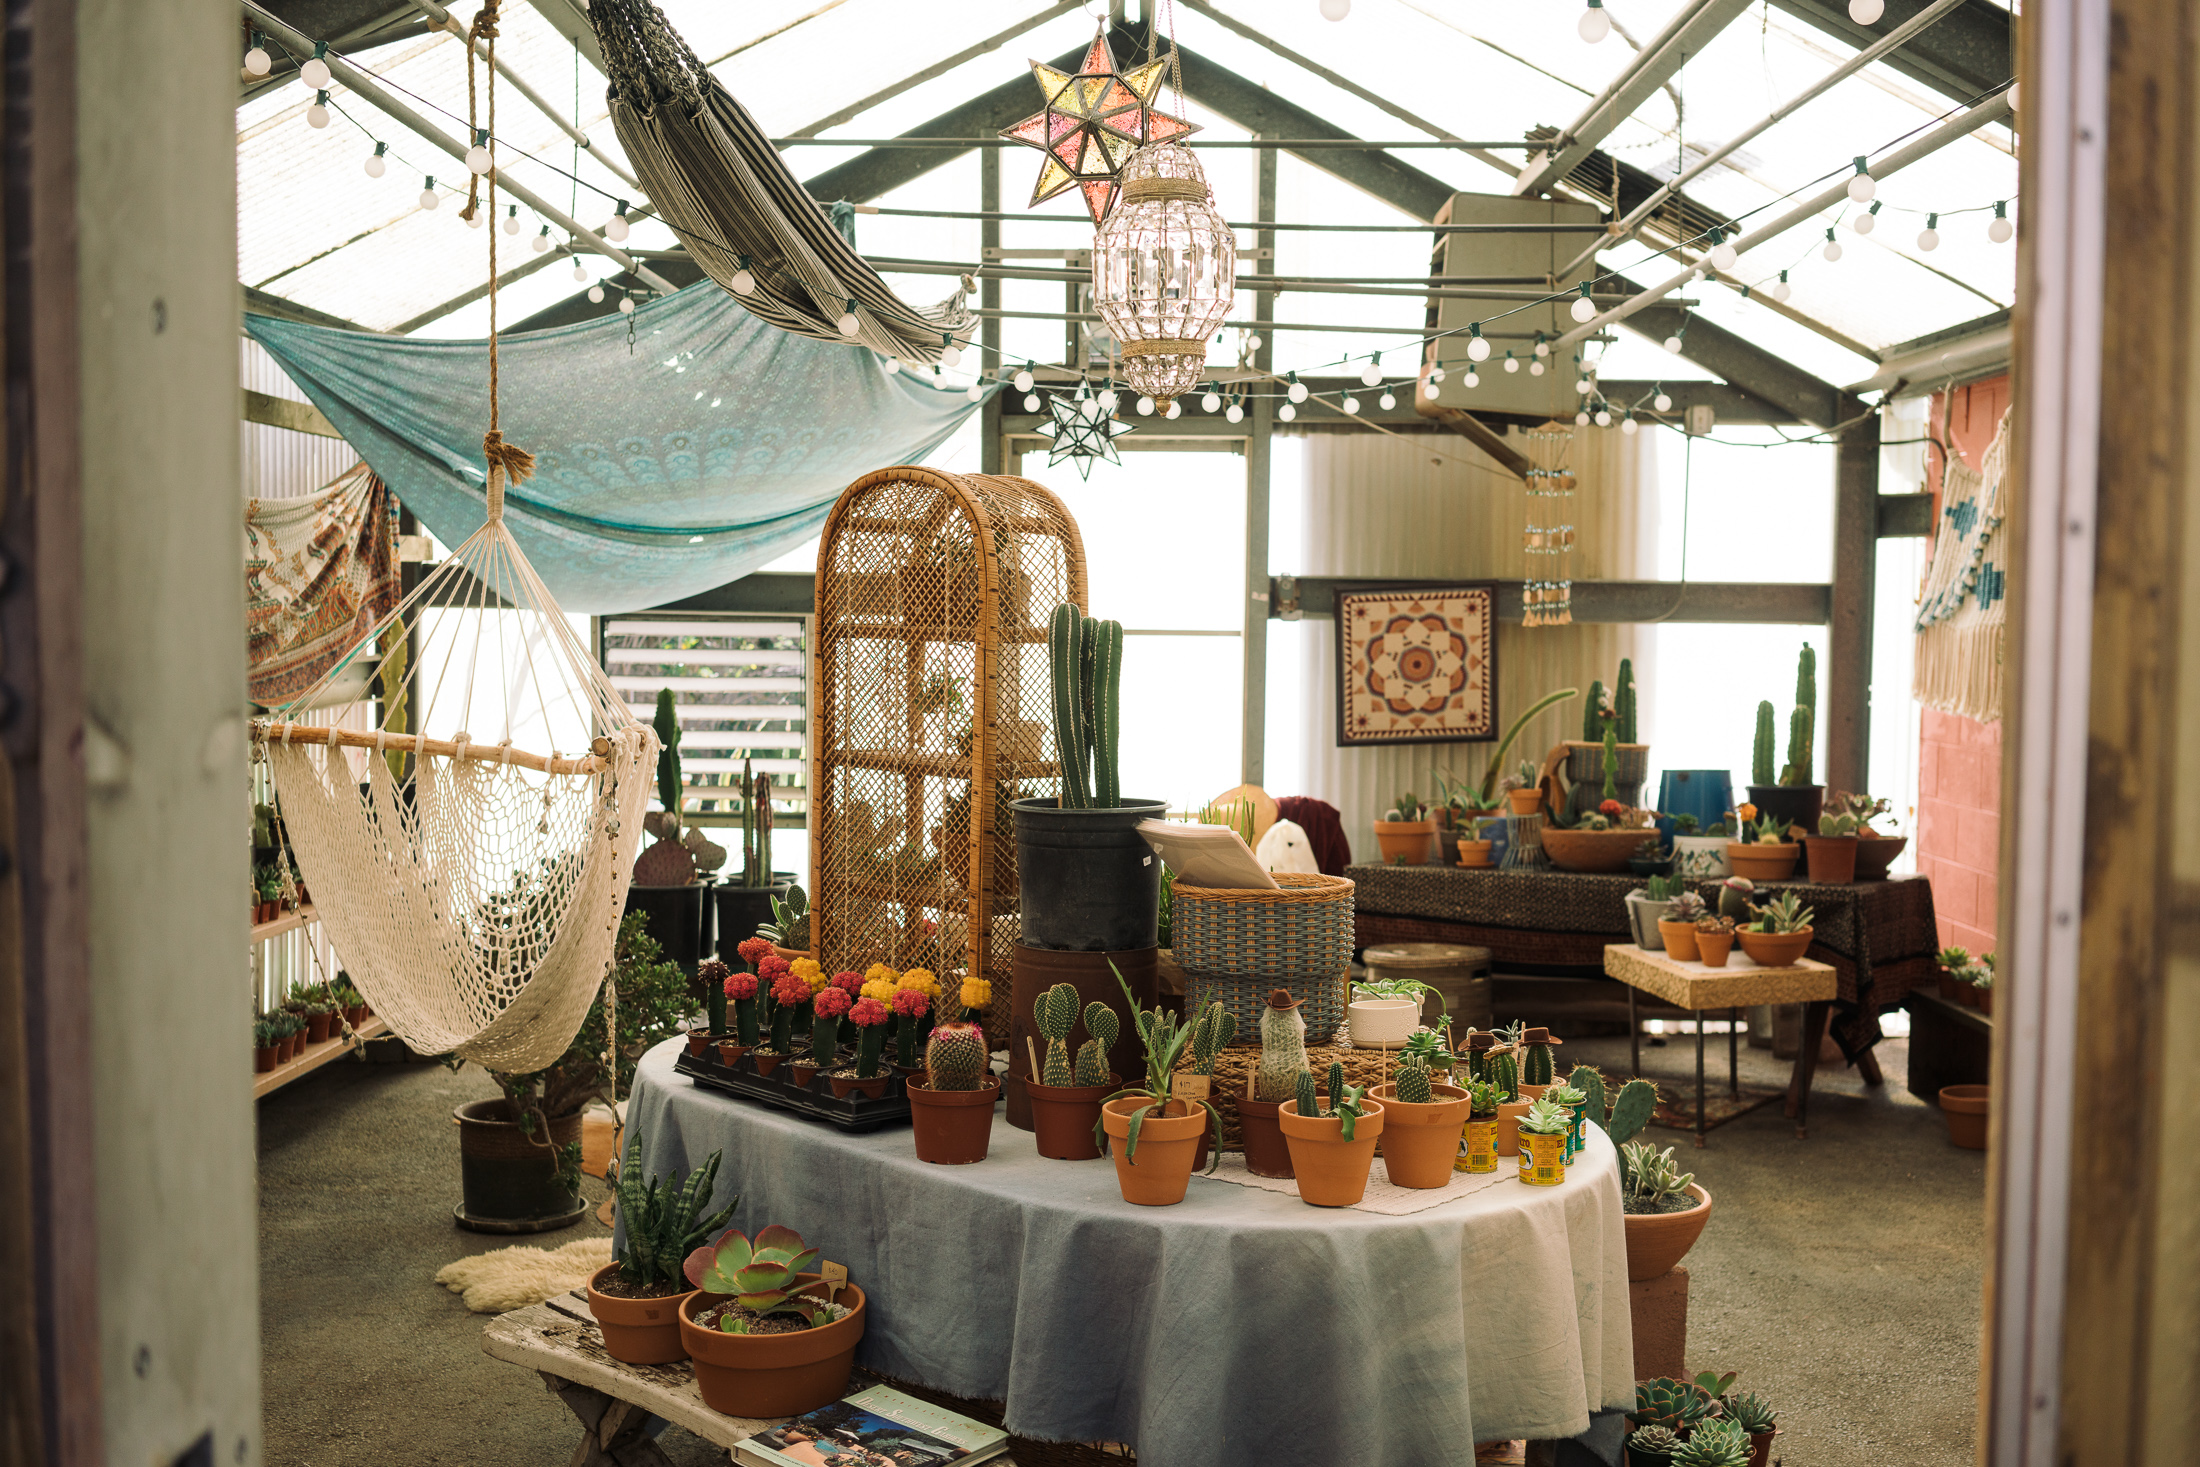 The Cub House shares the building with Prickley Pals, a succulent garden store, owned by Talkington’s girlfriend, Carla Alcibar, a former retail merchandiser for Anthropologie and Free People. Alcibar designed The Cub House’s layout and does the shop's merchandising.